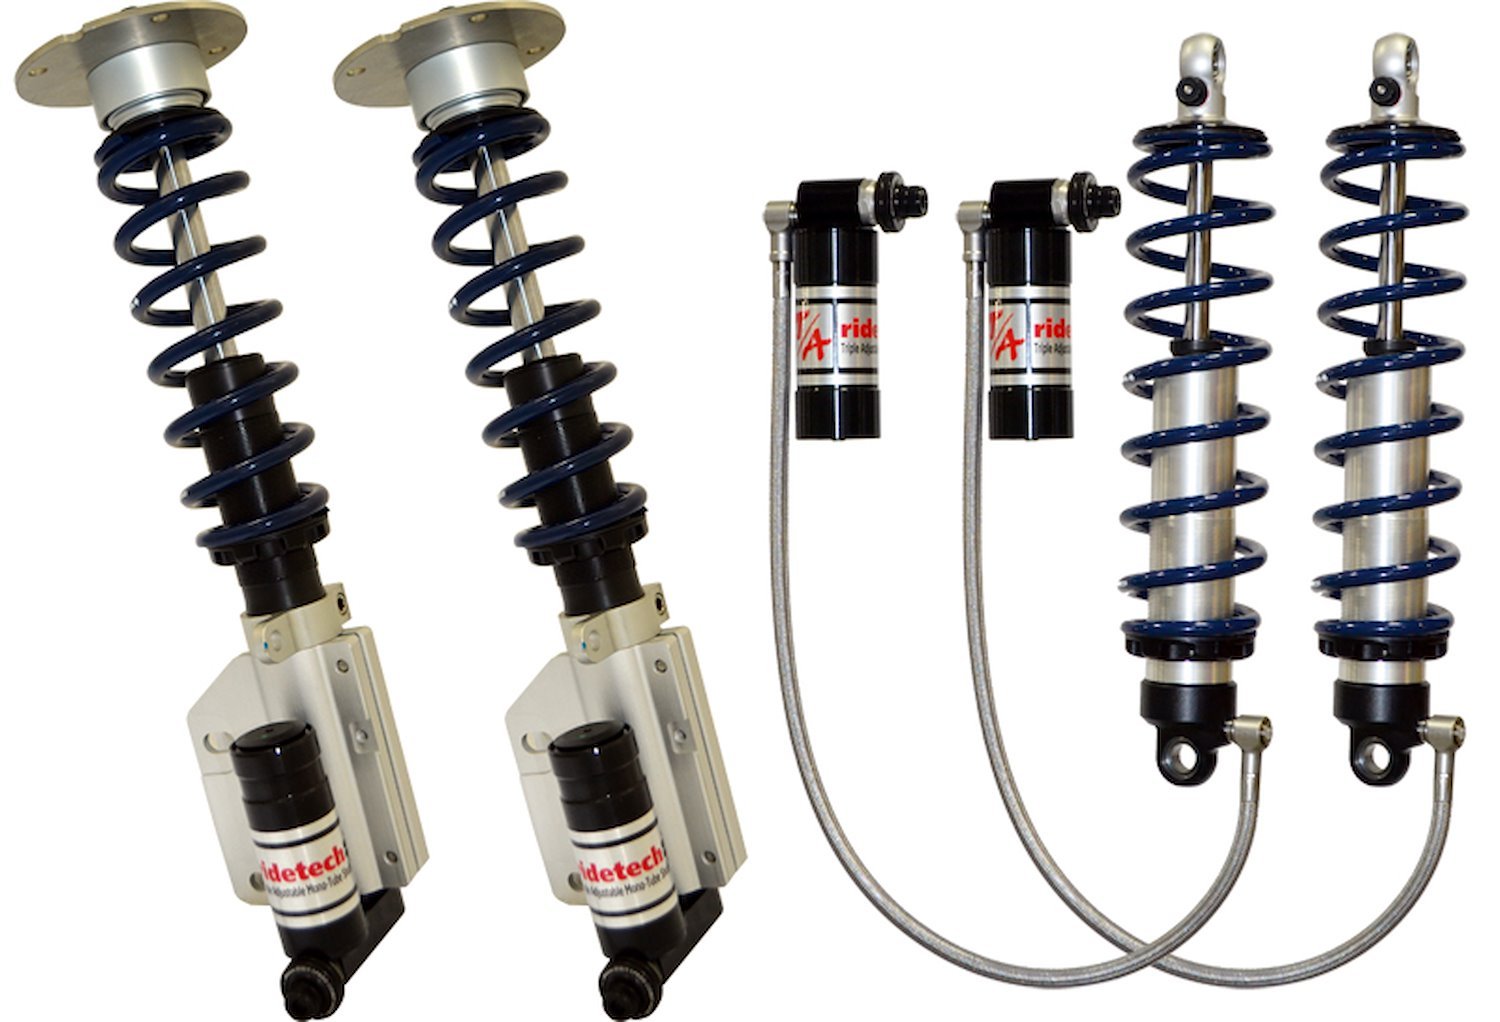 Level 3 CoilOver System for 2005-14 Mustang. Includes TQ Series front and rear CoilOvers.